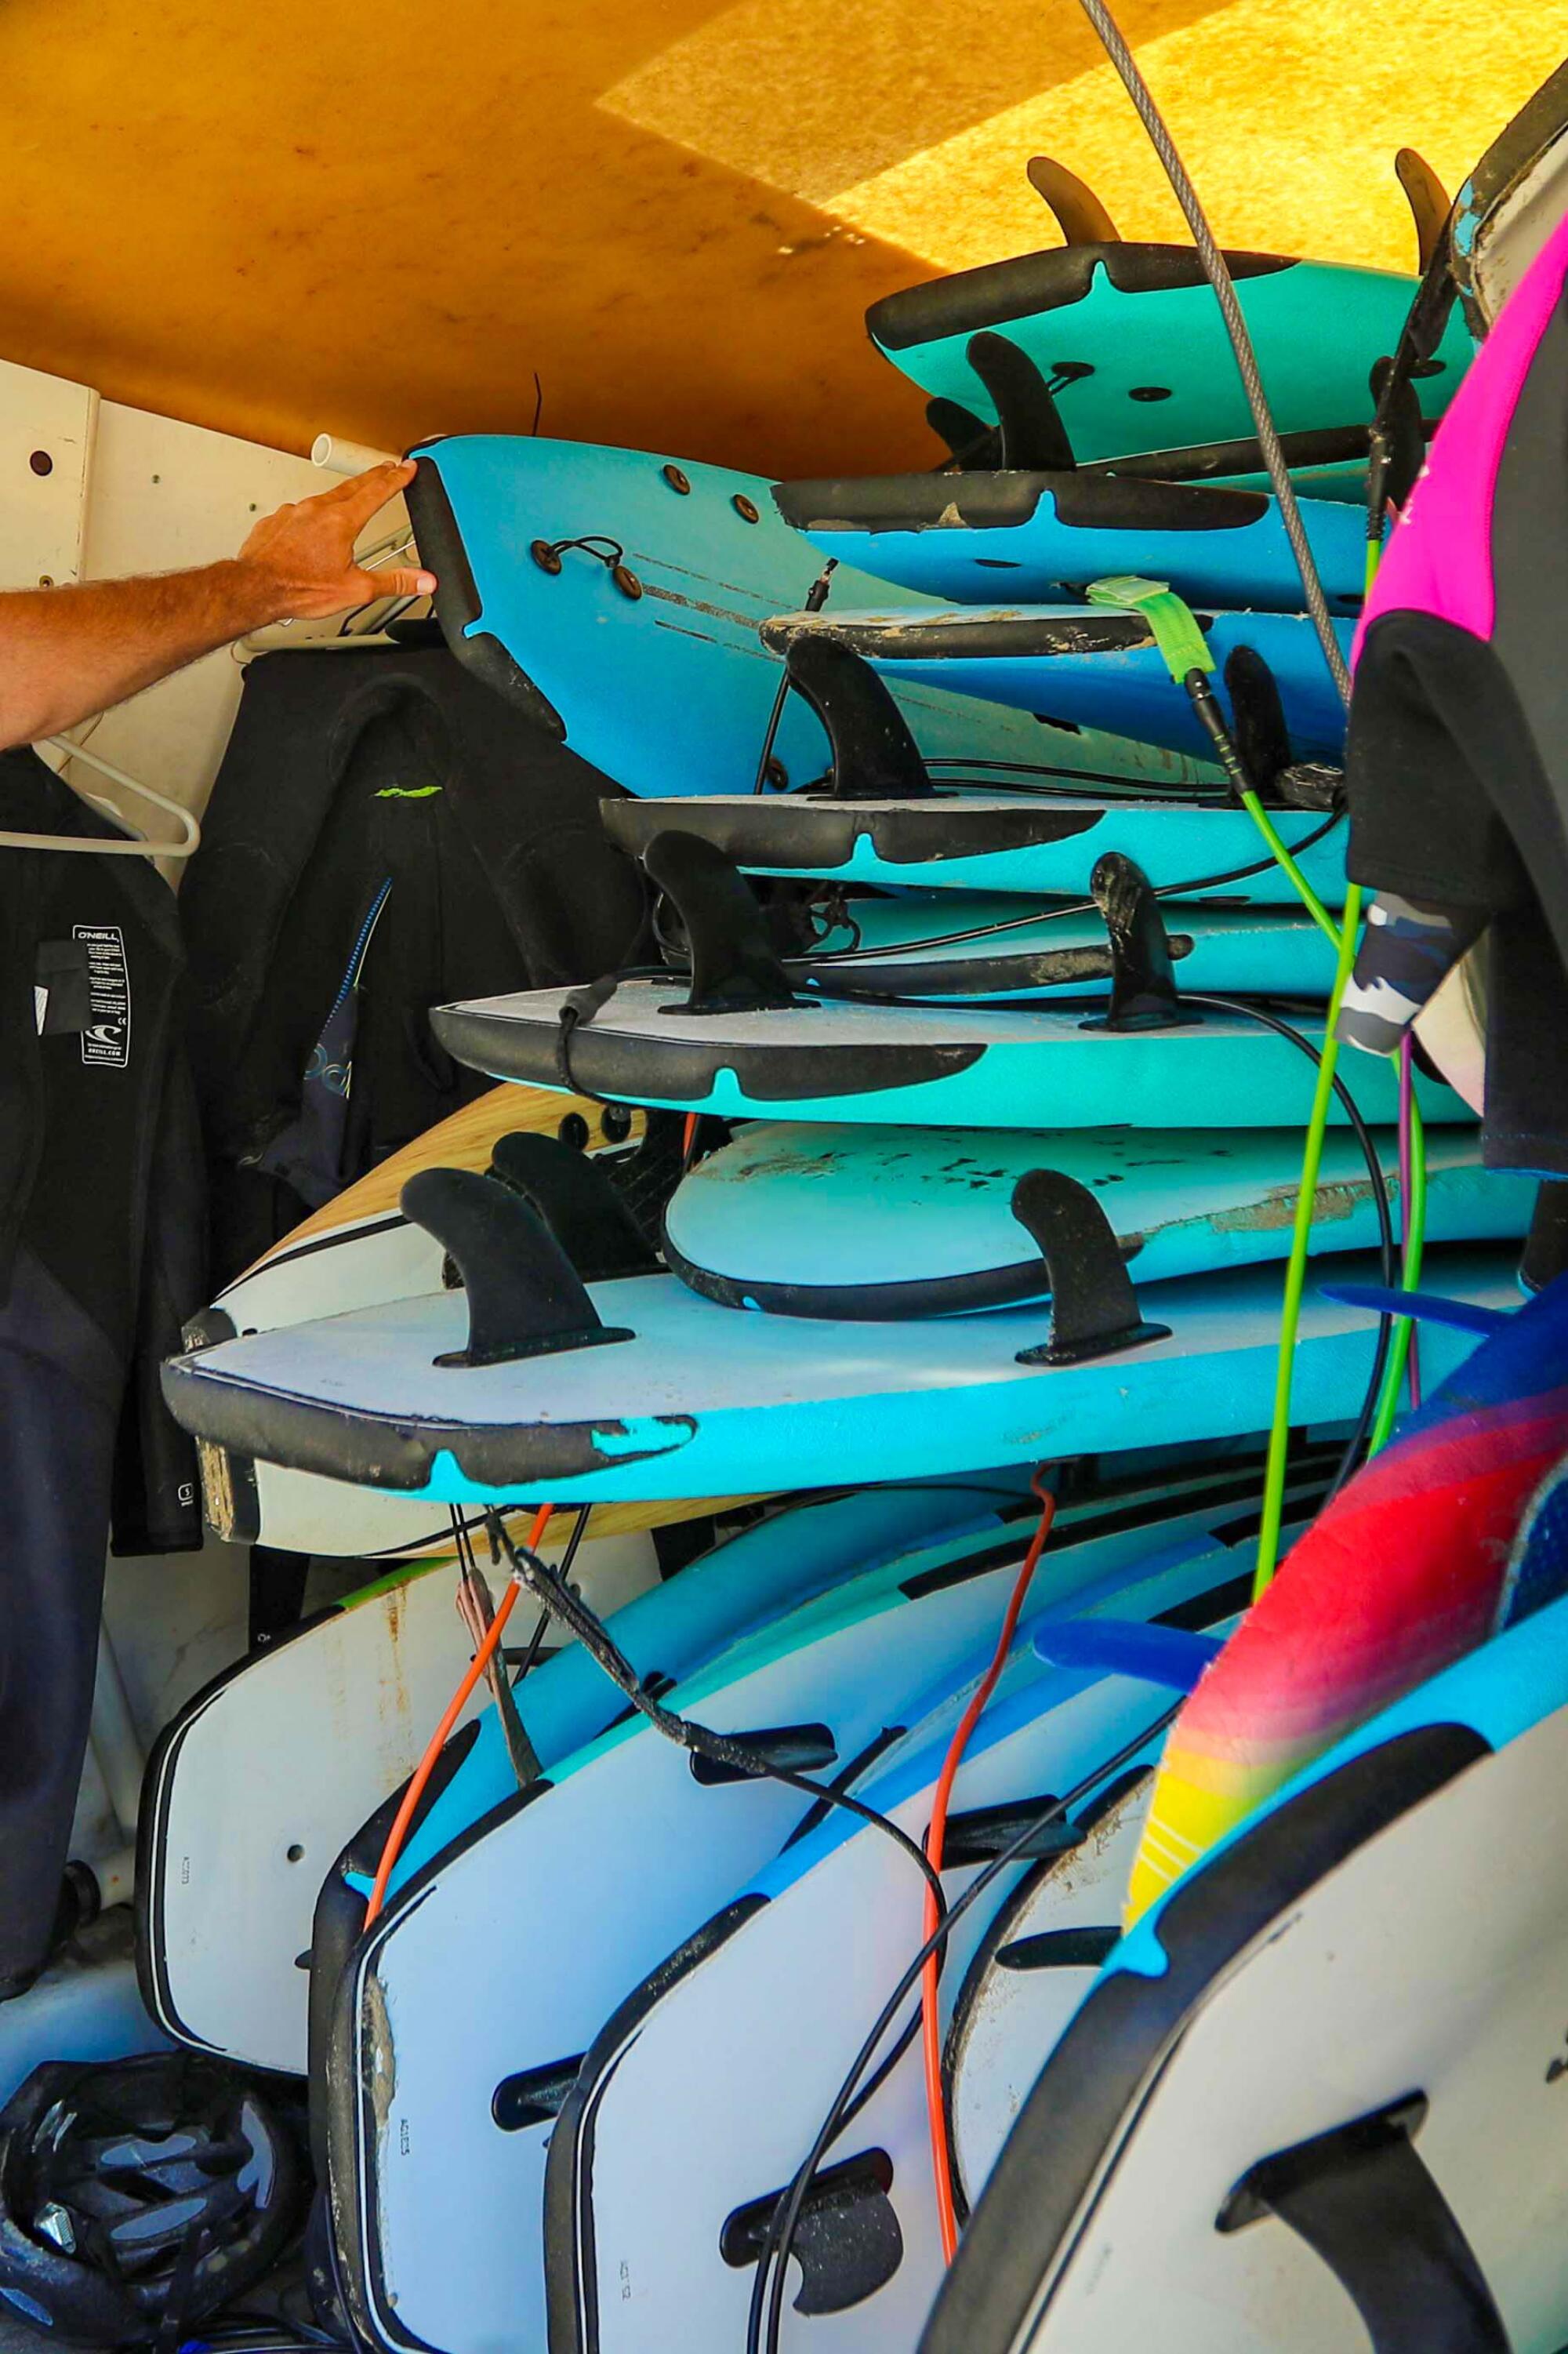 A stack of soft-top surfboards